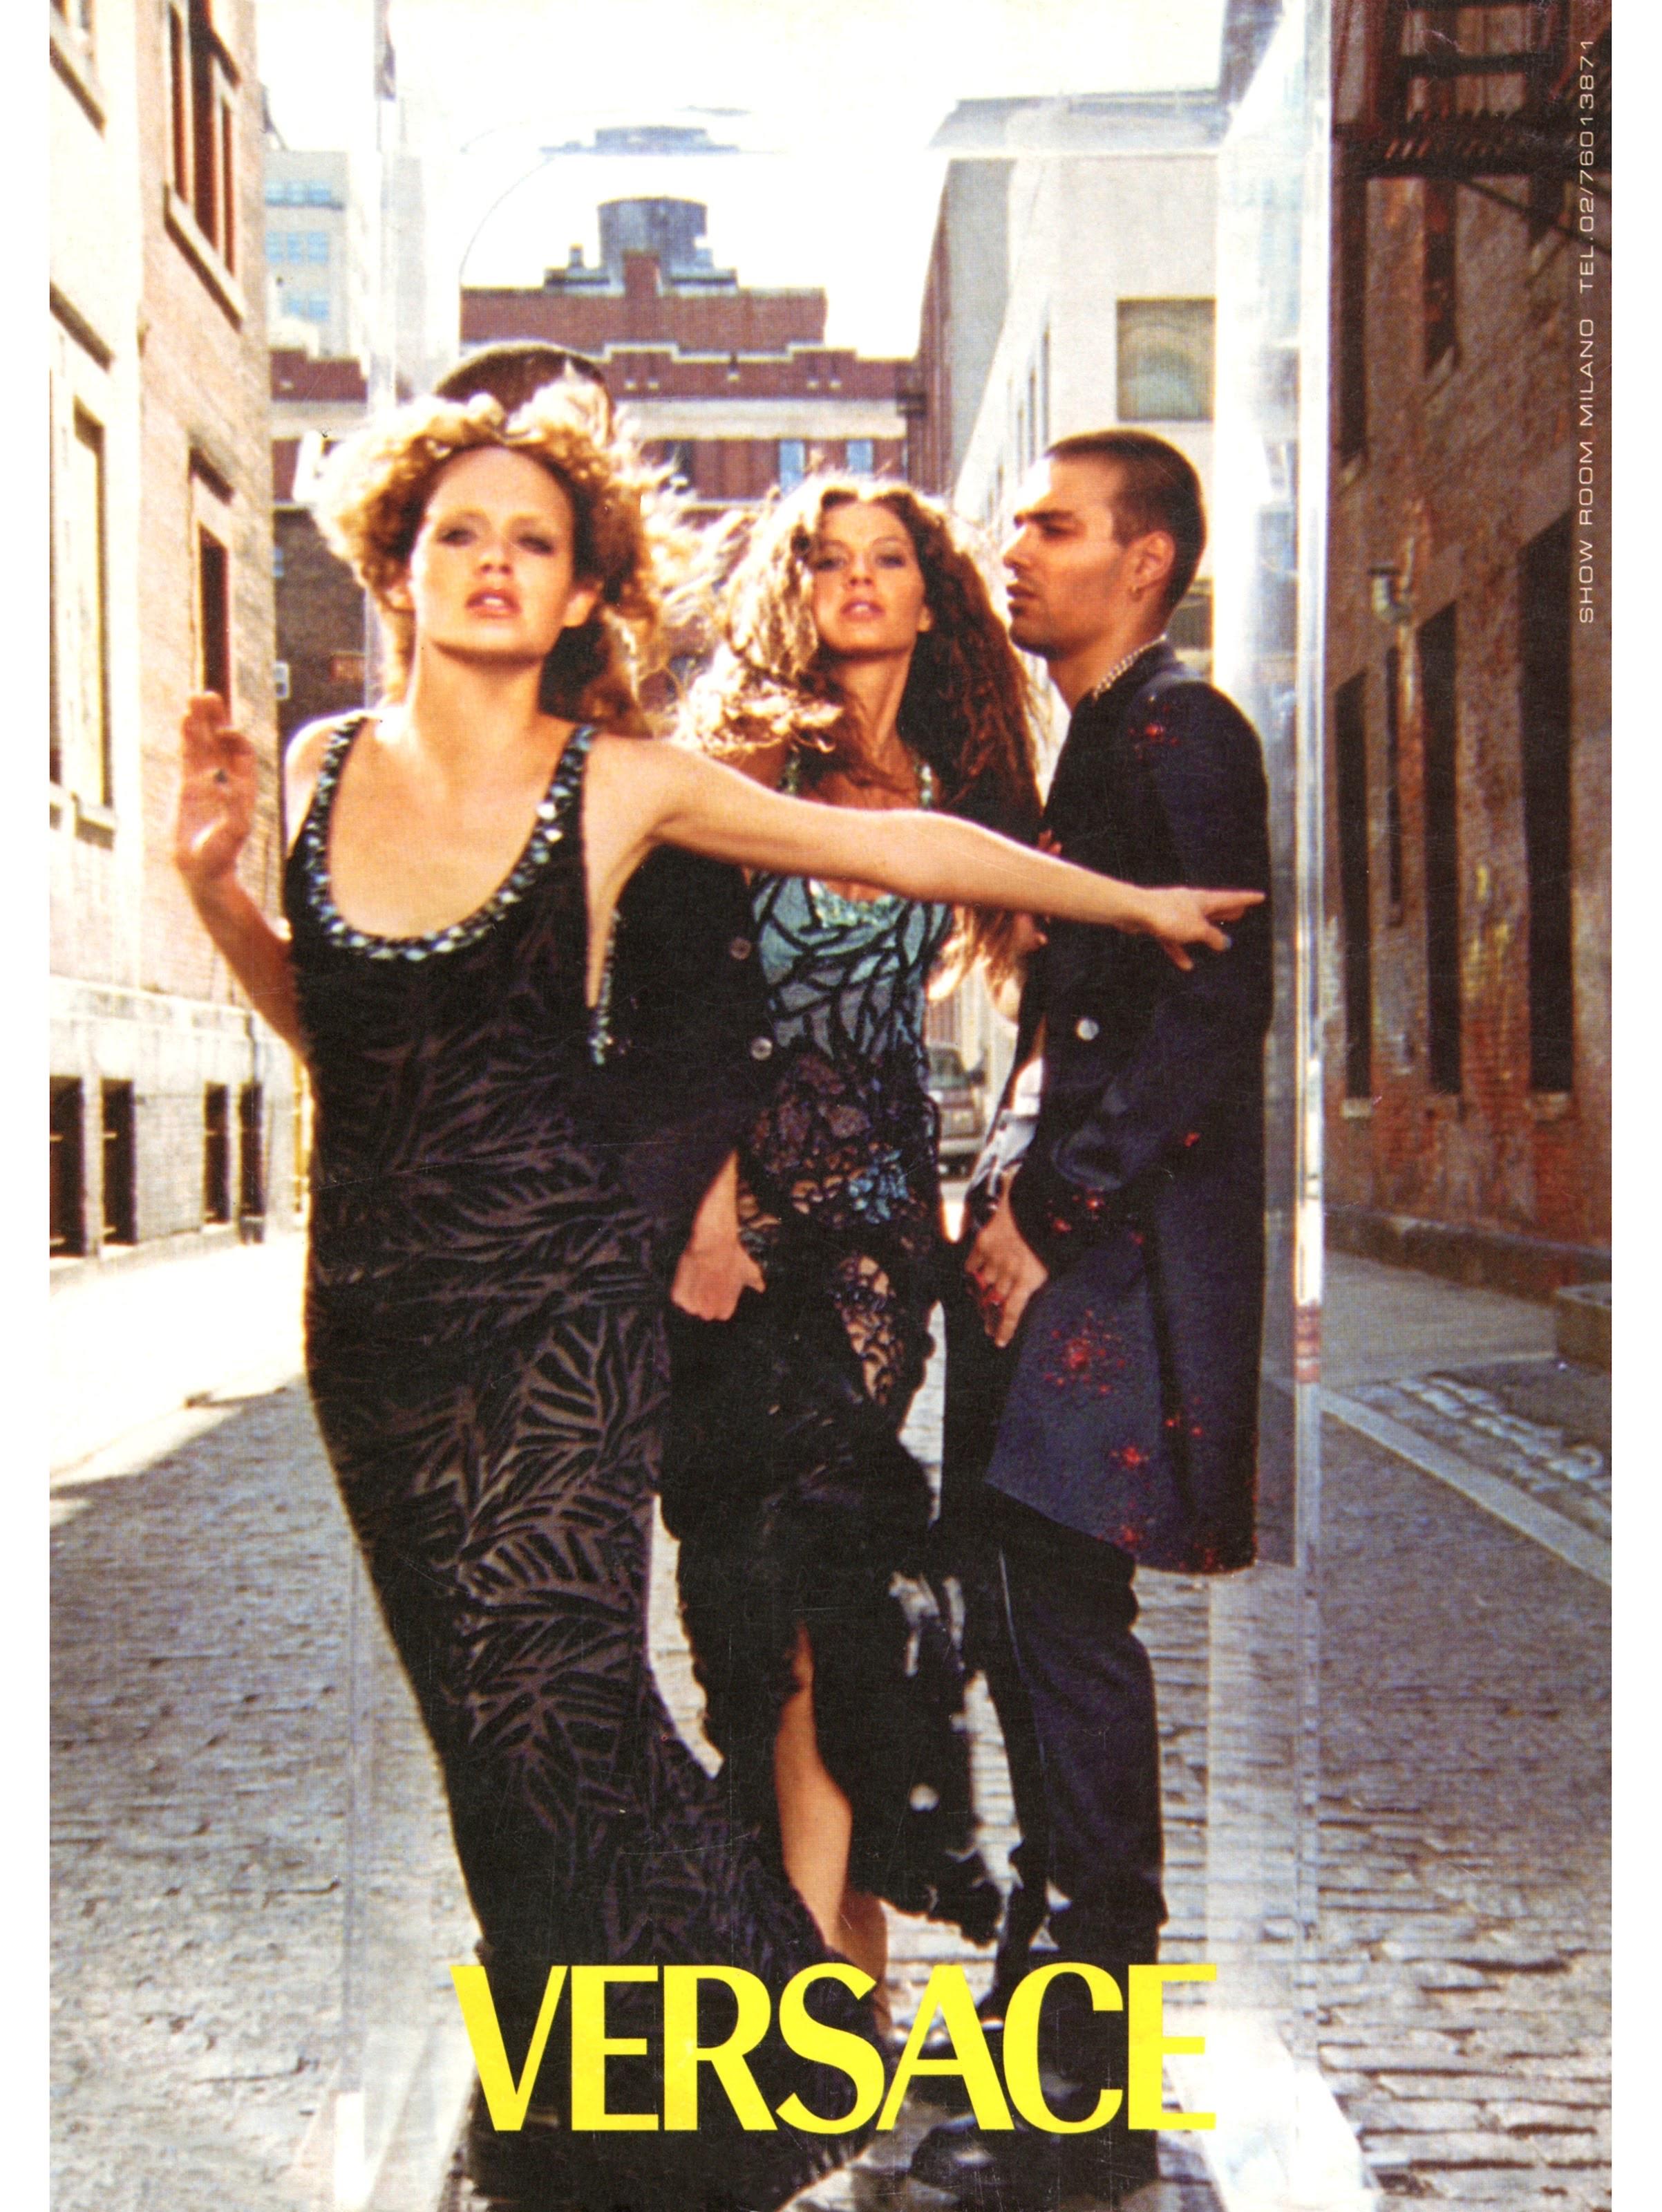 Presenting a beautiful black Gianni Versace strapless dress, designed by Donatella Versace. From the Fall/Winter 1999 collection, the same rhinestone and beading technique was seen on the F/W 1999 menswear collection and in the ad campaign. This